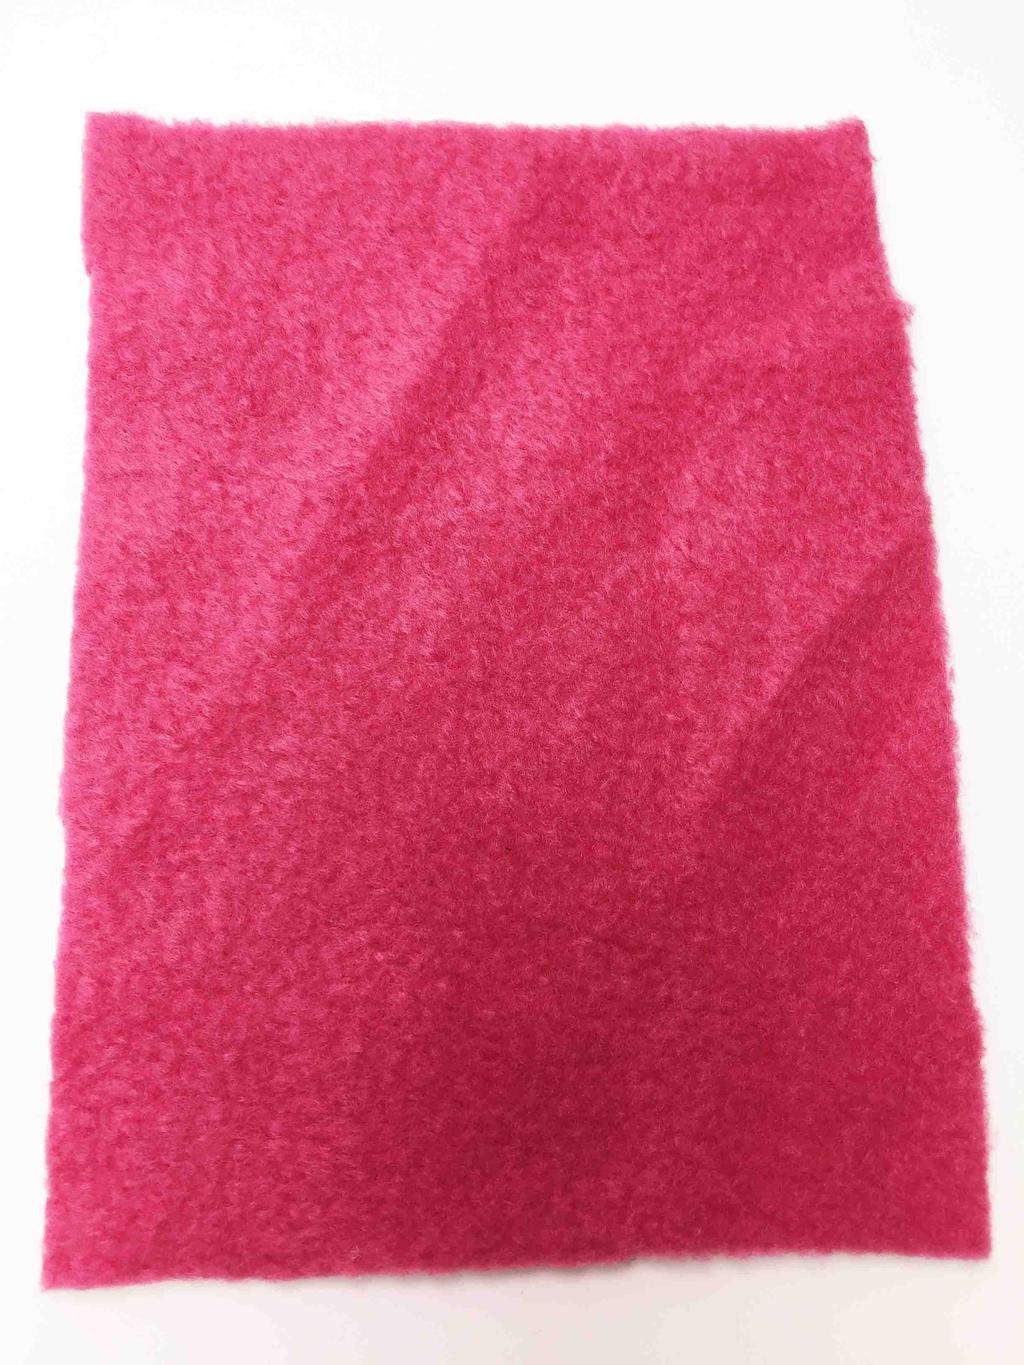 Polar Fleece Source: Polyester Construction: Knitted with brushed finish Properties: soft, warm, not absorbent, dries quickly Other